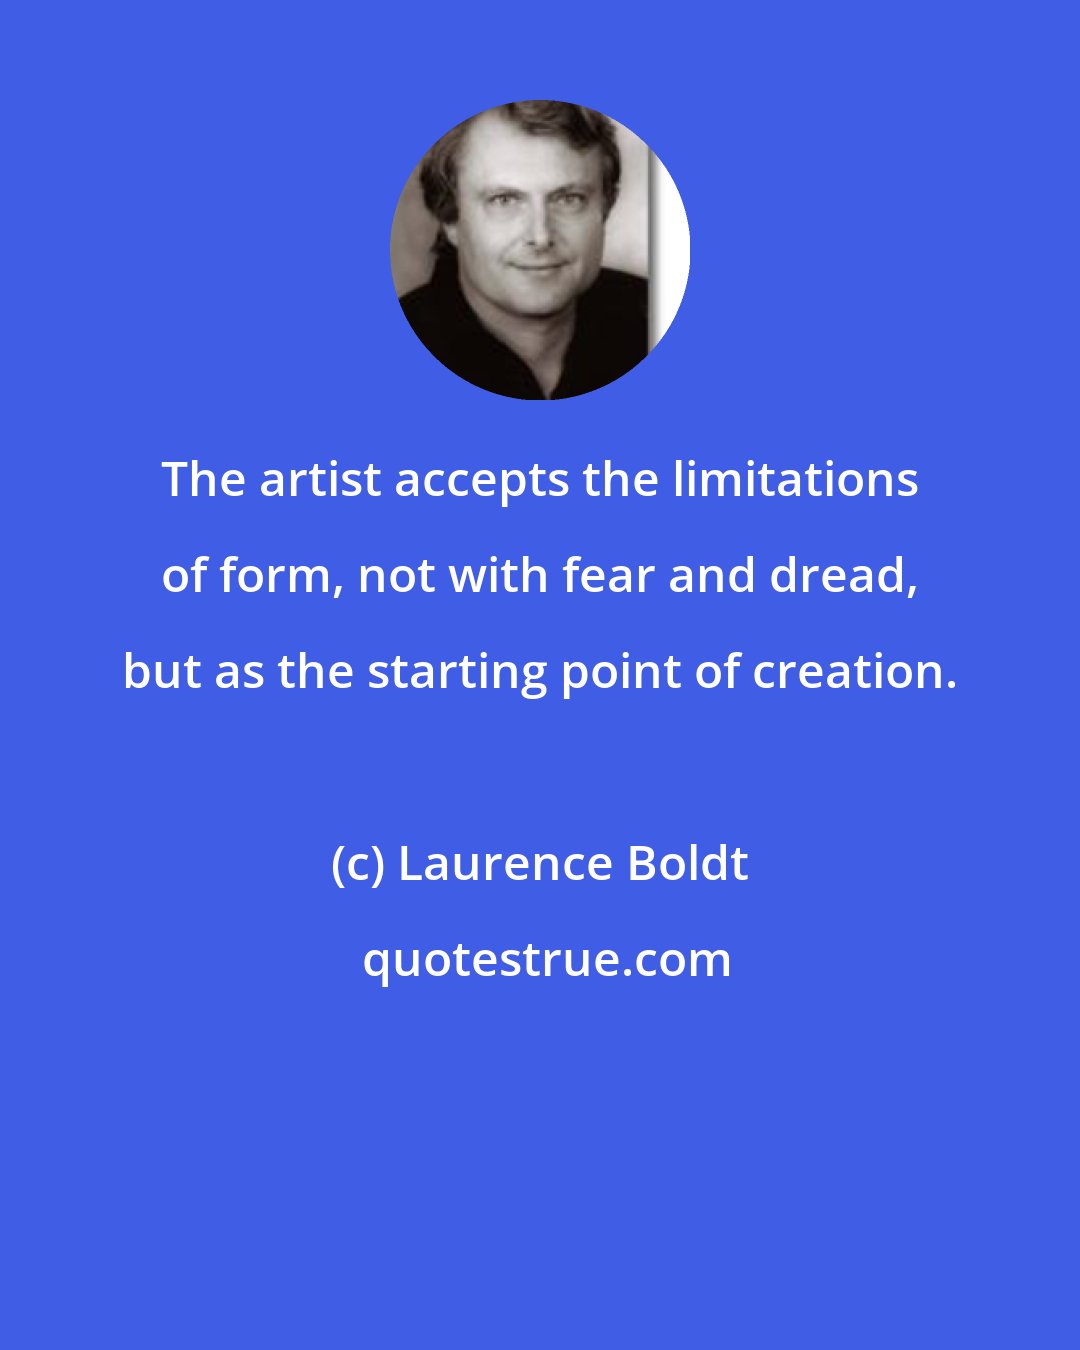 Laurence Boldt: The artist accepts the limitations of form, not with fear and dread, but as the starting point of creation.